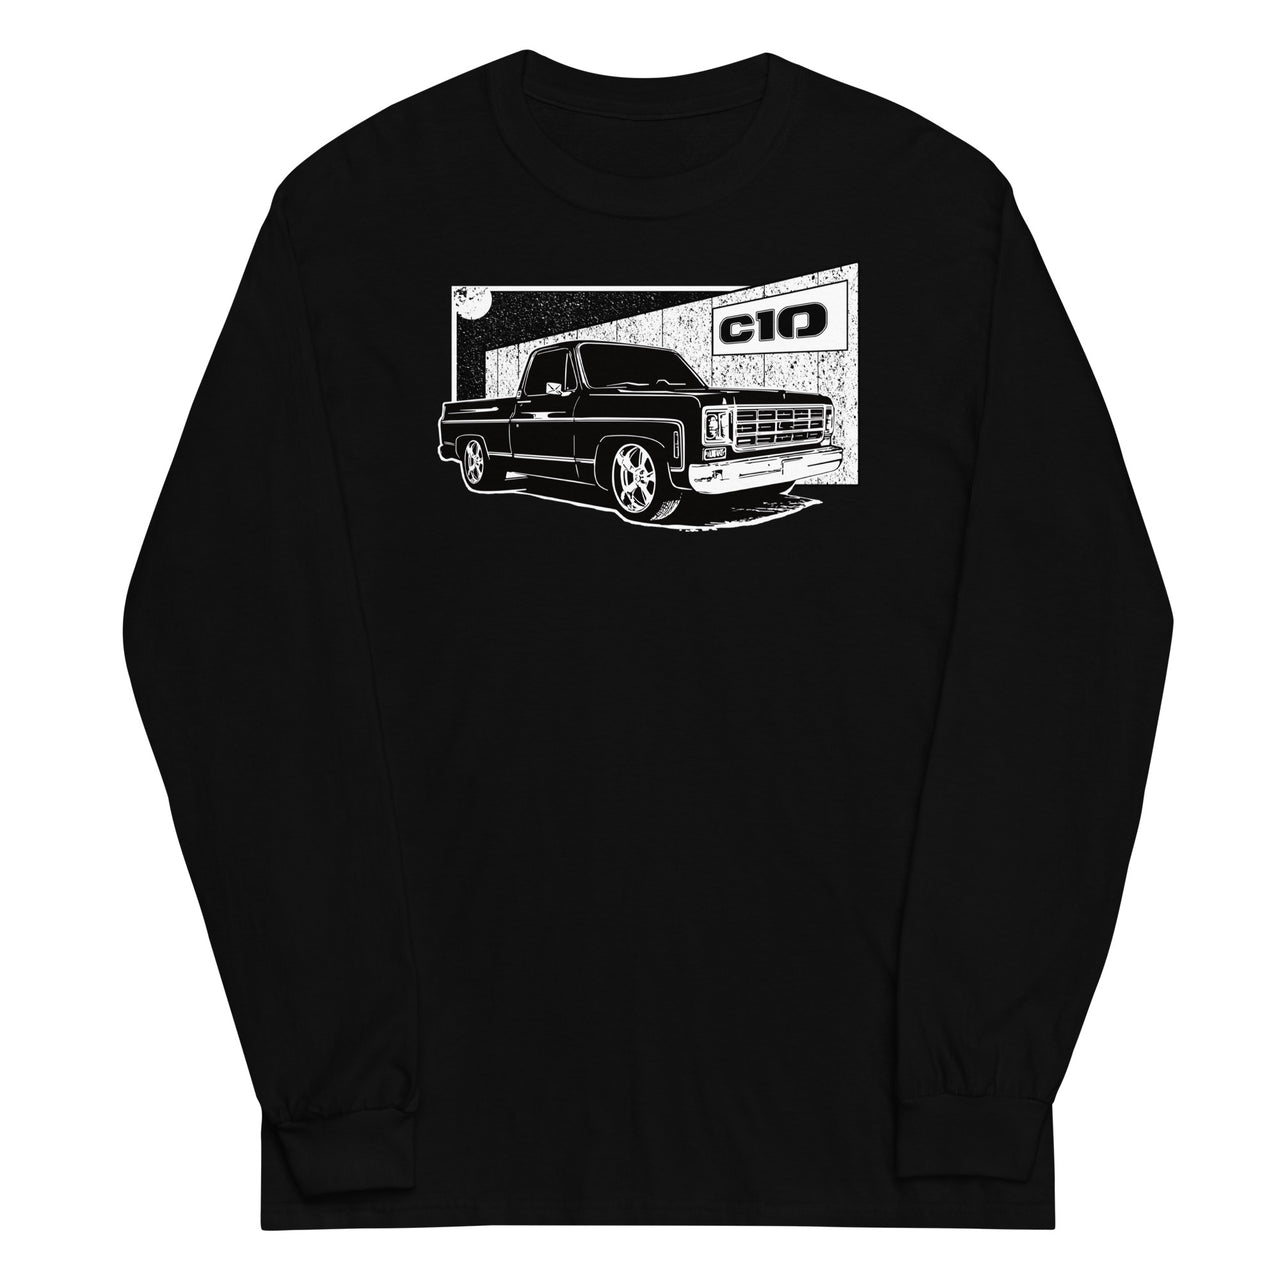 77 Square Body C10 Long Sleeve T-Shirt in black